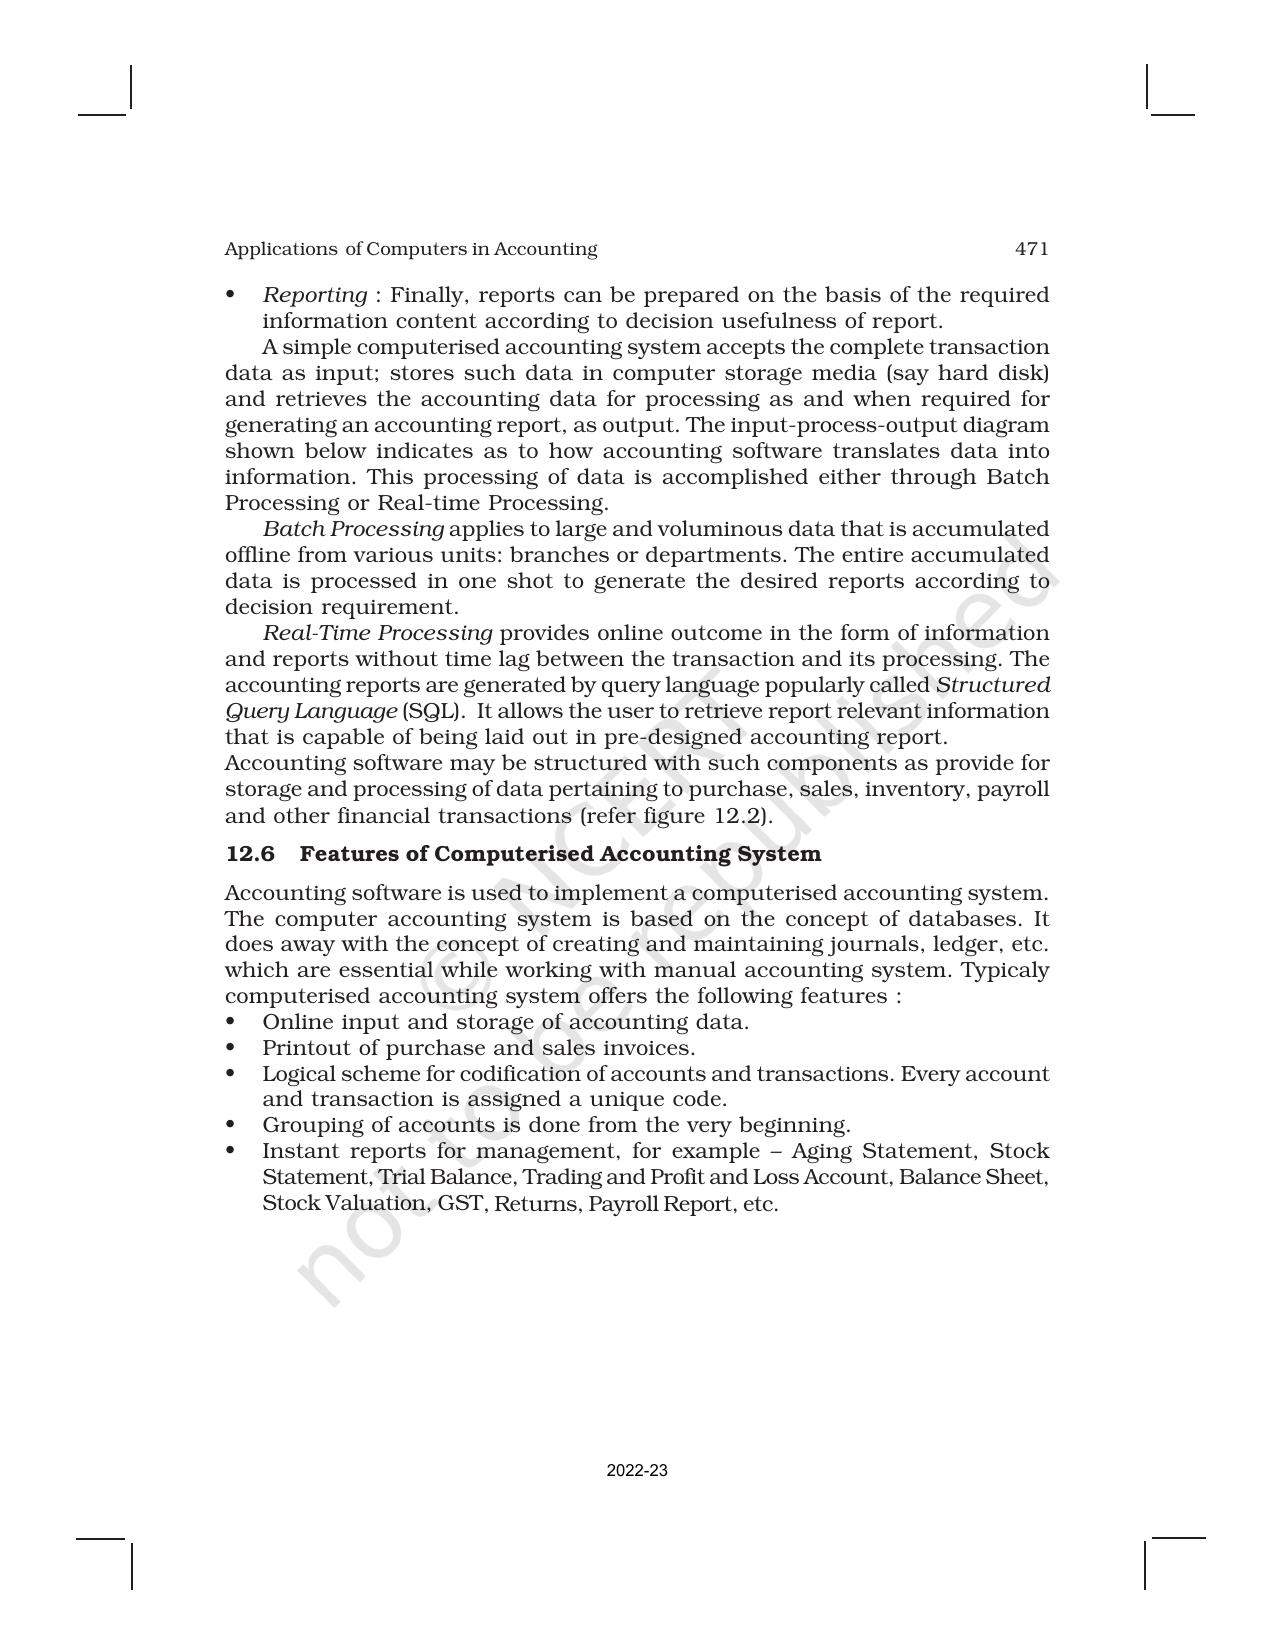 NCERT Book for Class 11 Accountancy (Part-II) Chapter 12 Applications of Computers in Accounting - Page 9